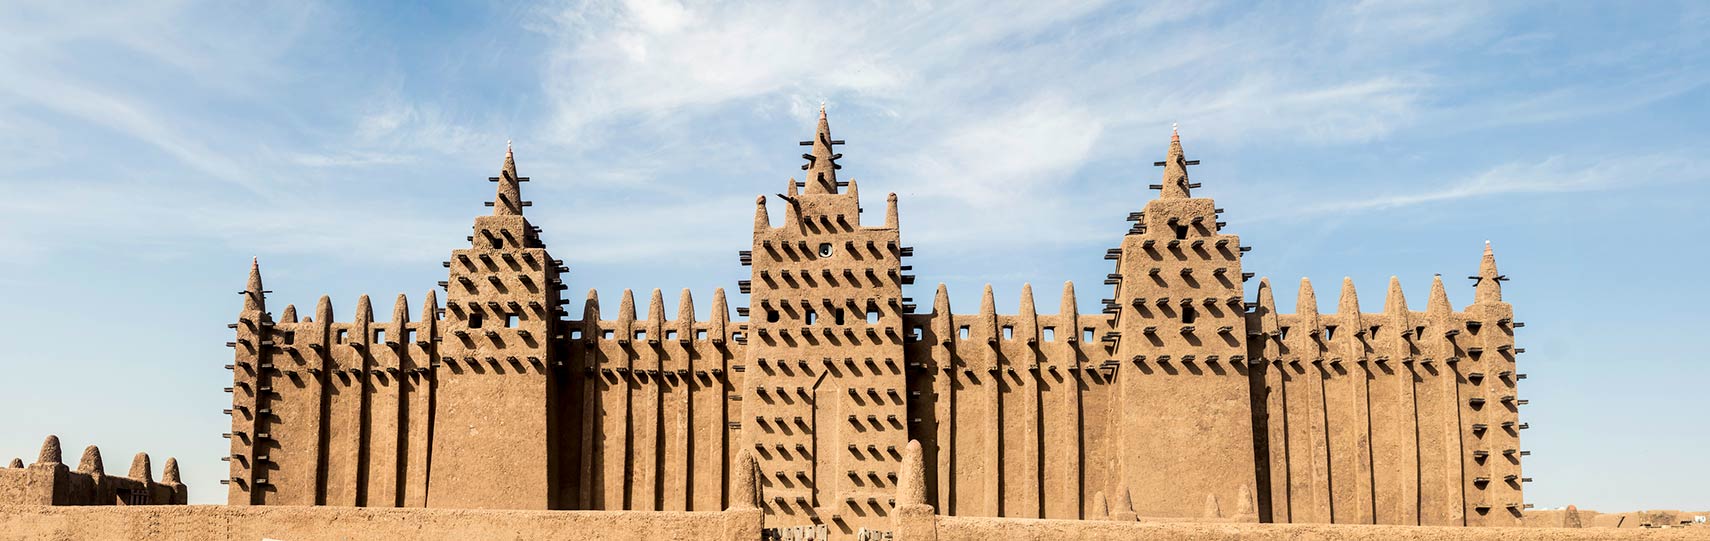 Adobe Great Mosque of Djenné in Mali